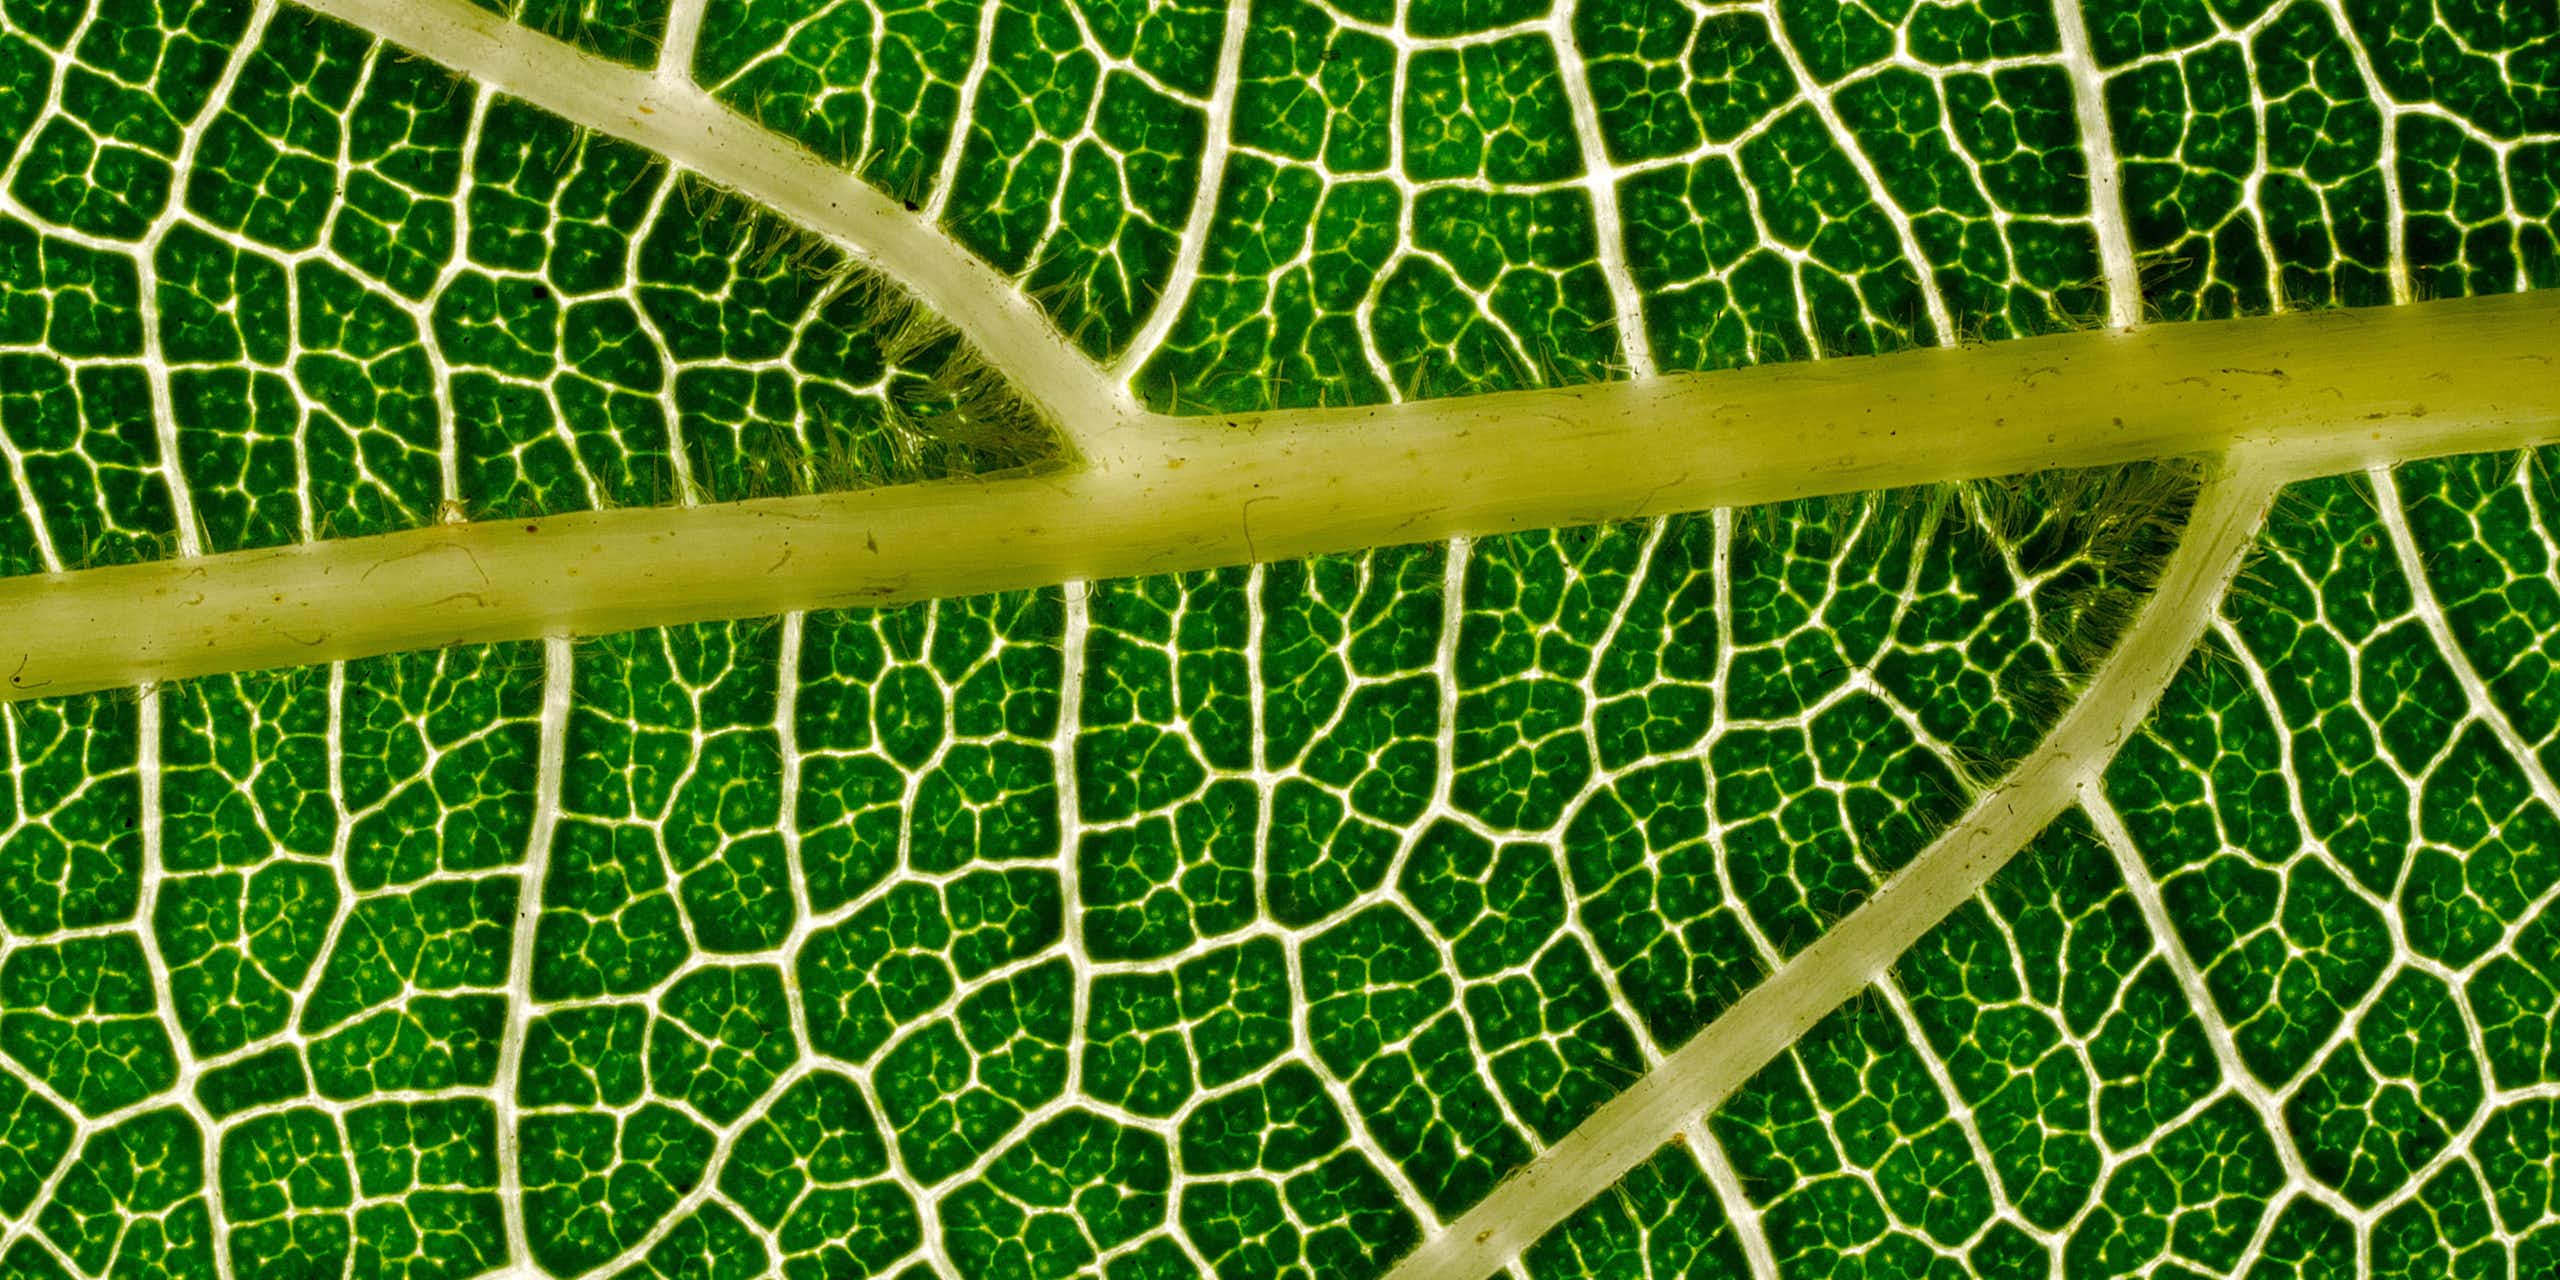 Close-up of a green leaf, with cells of green divided by thick white veins